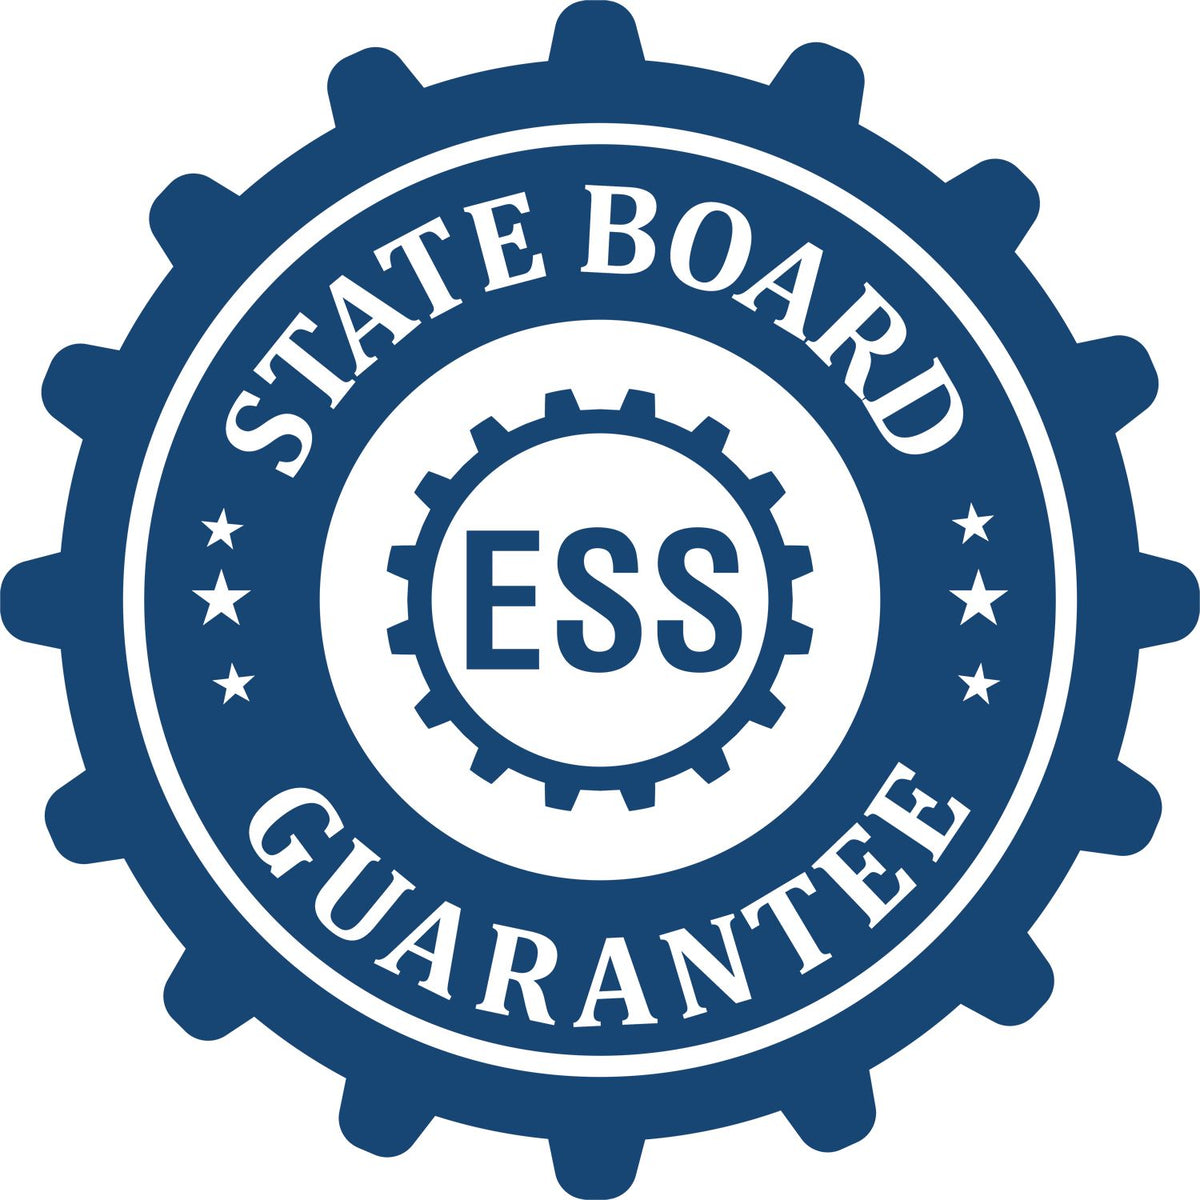 An emblem in a gear shape illustrating a state board guarantee for the Premium MaxLight Pre-Inked Texas Landscape Architectural Stamp product.